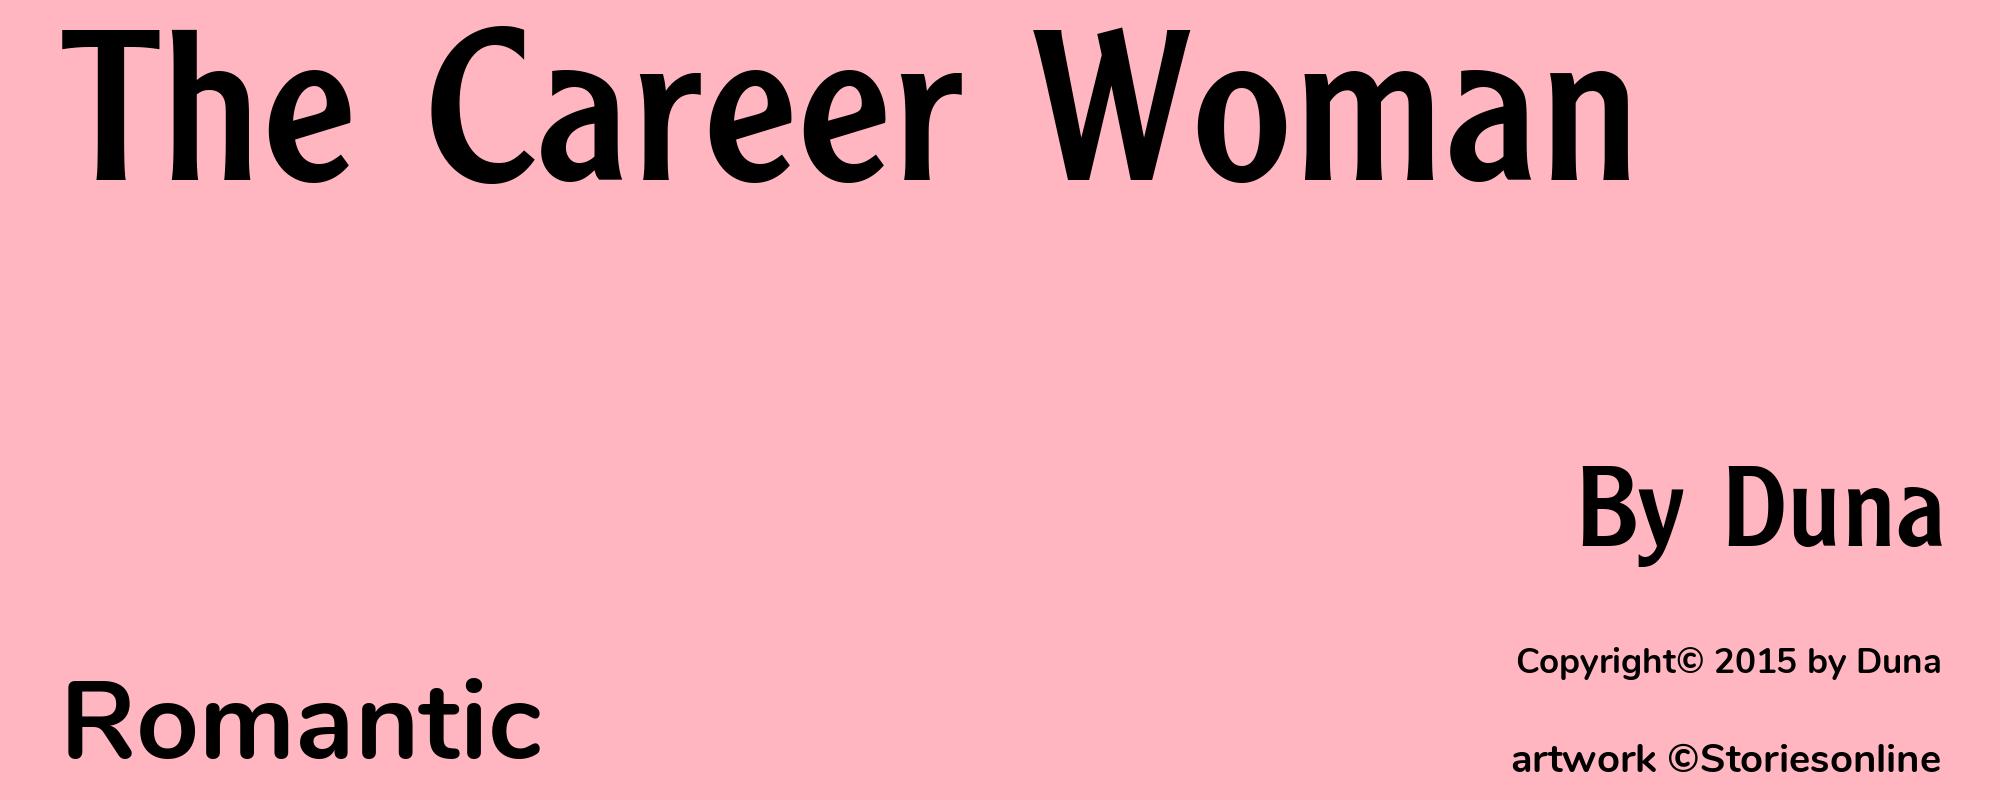 The Career Woman - Cover